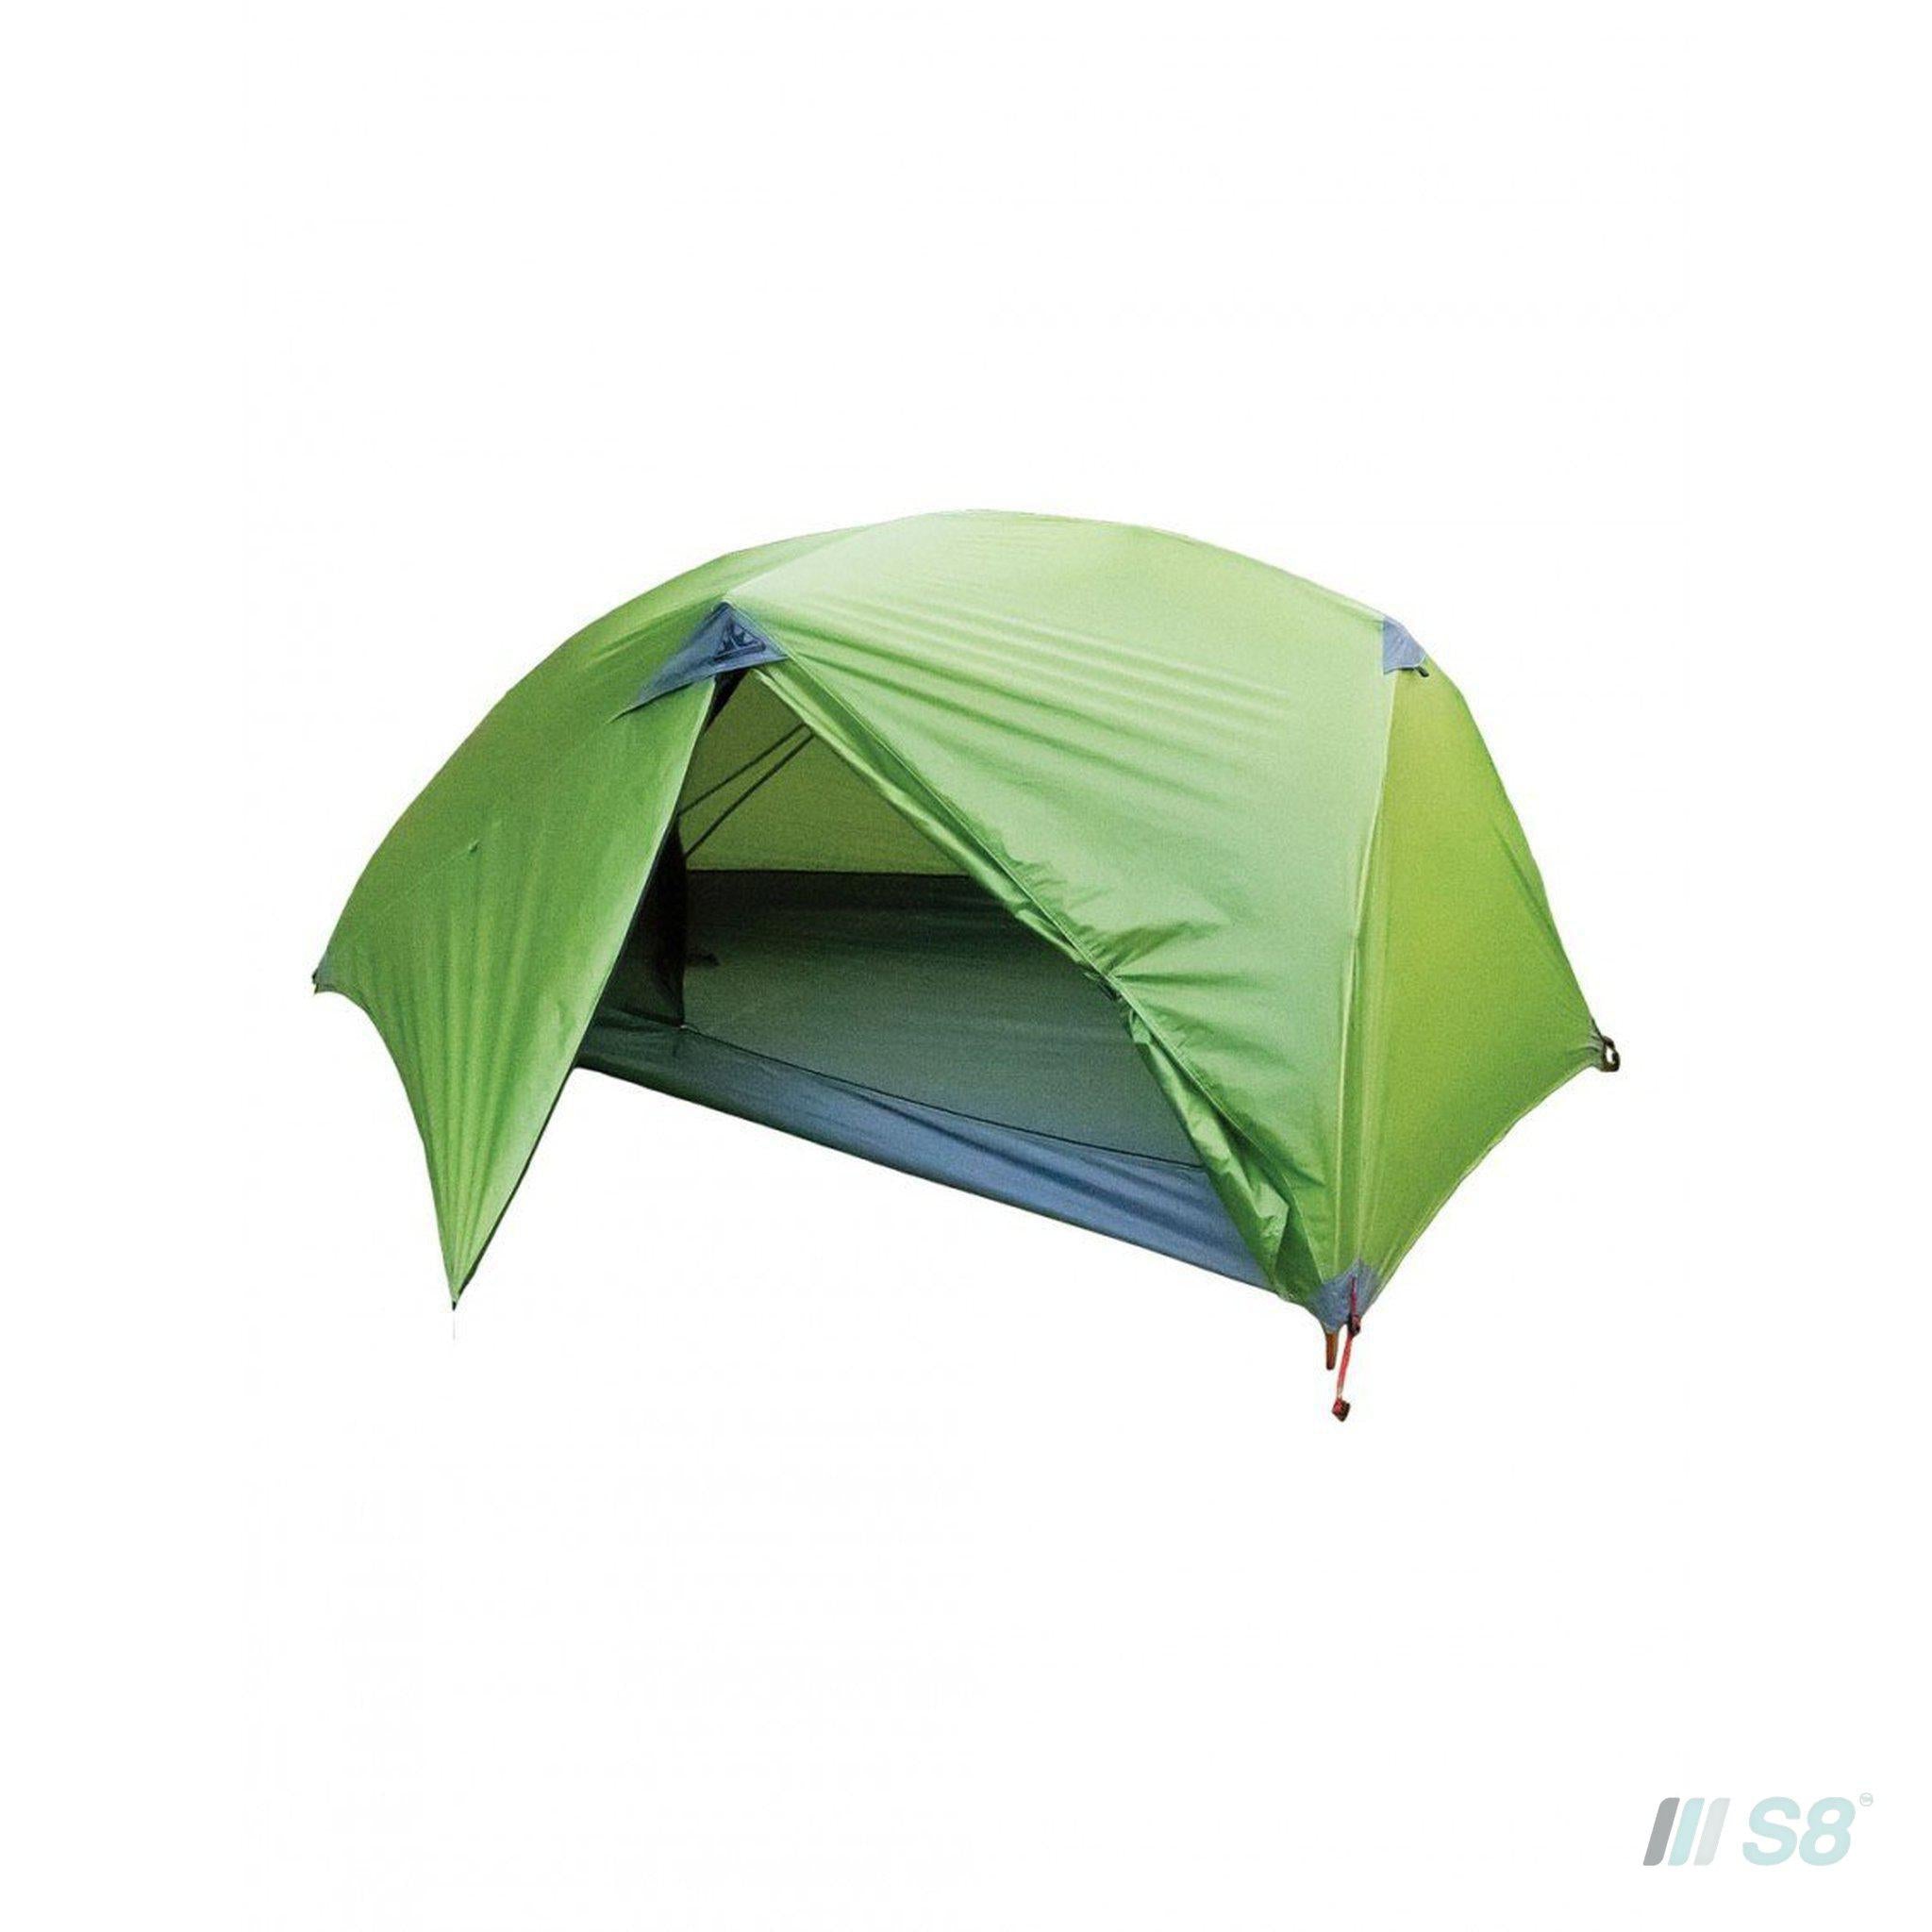 Wilderness Equipment Space 1 (Mesh Inner)-Wilderness Equipment-S8 Products Group